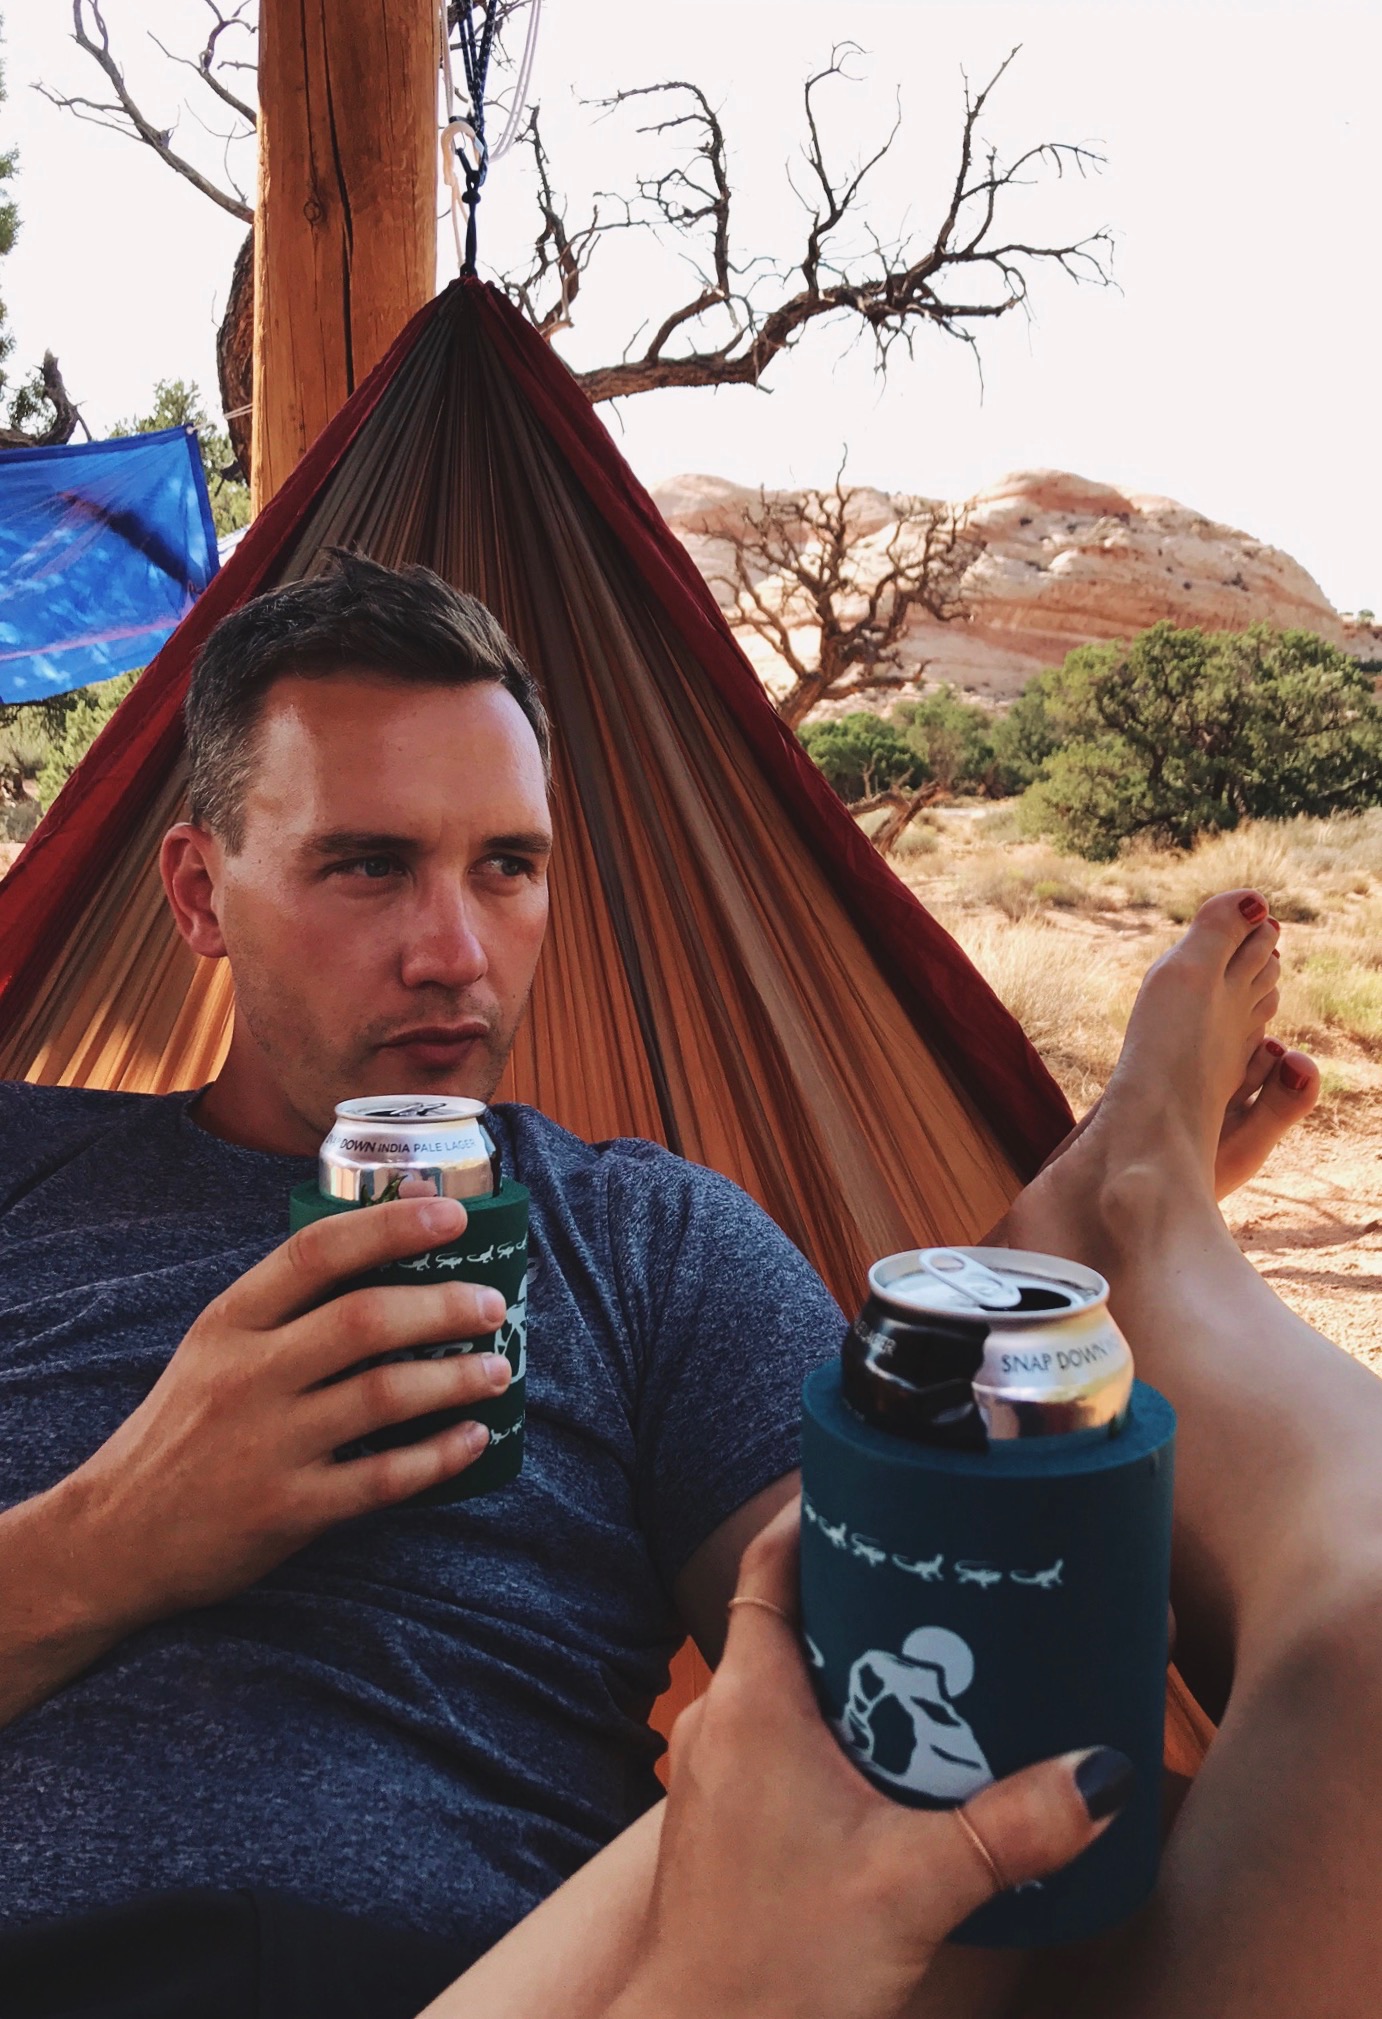 Doing our best to cool off (a la hammock and IPAs) in Canyonlands